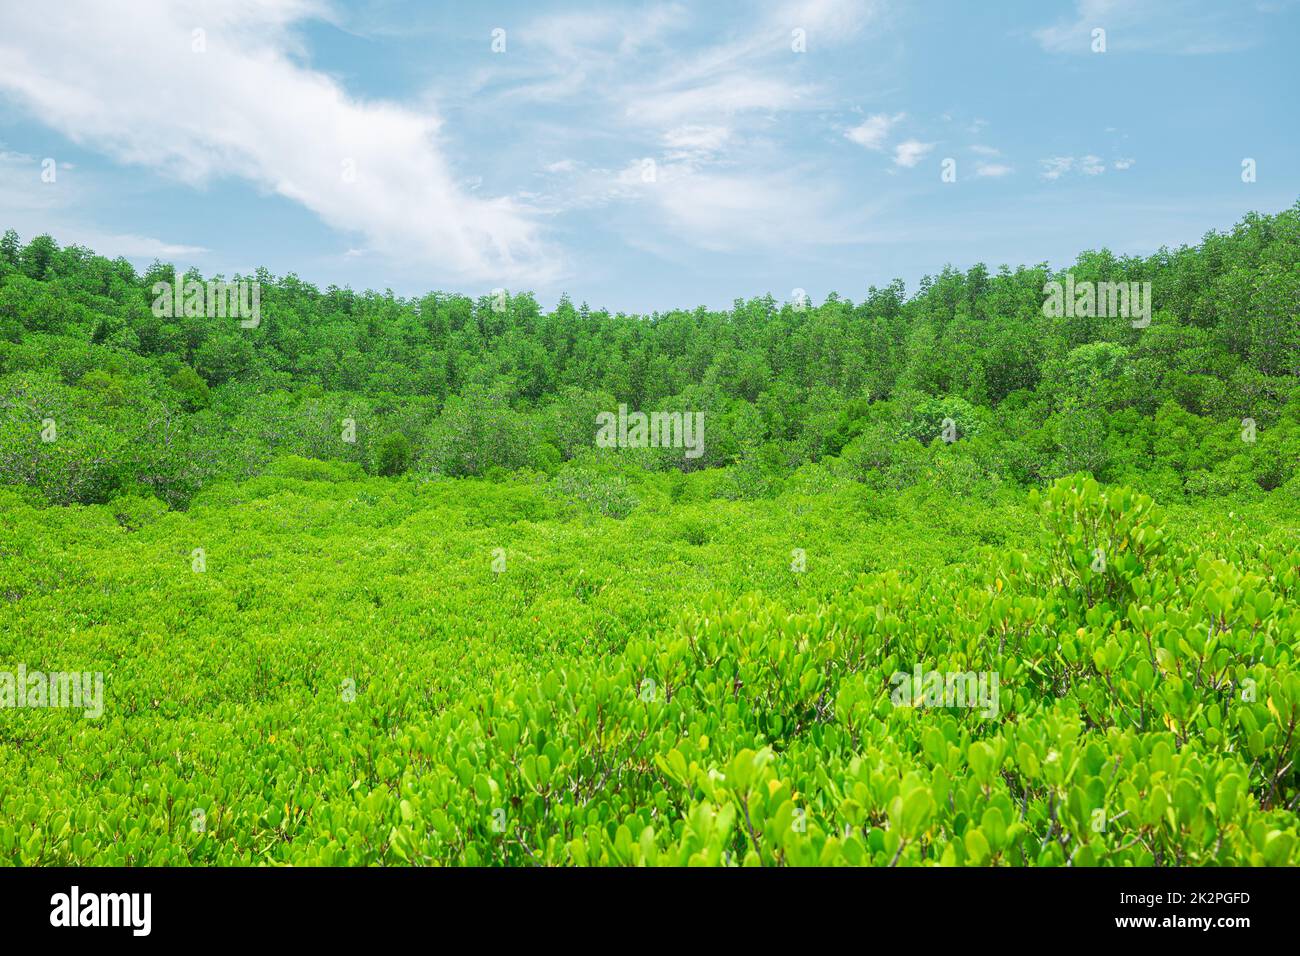 Group of tree background with sunny day blue sky white clouds Stock Photo